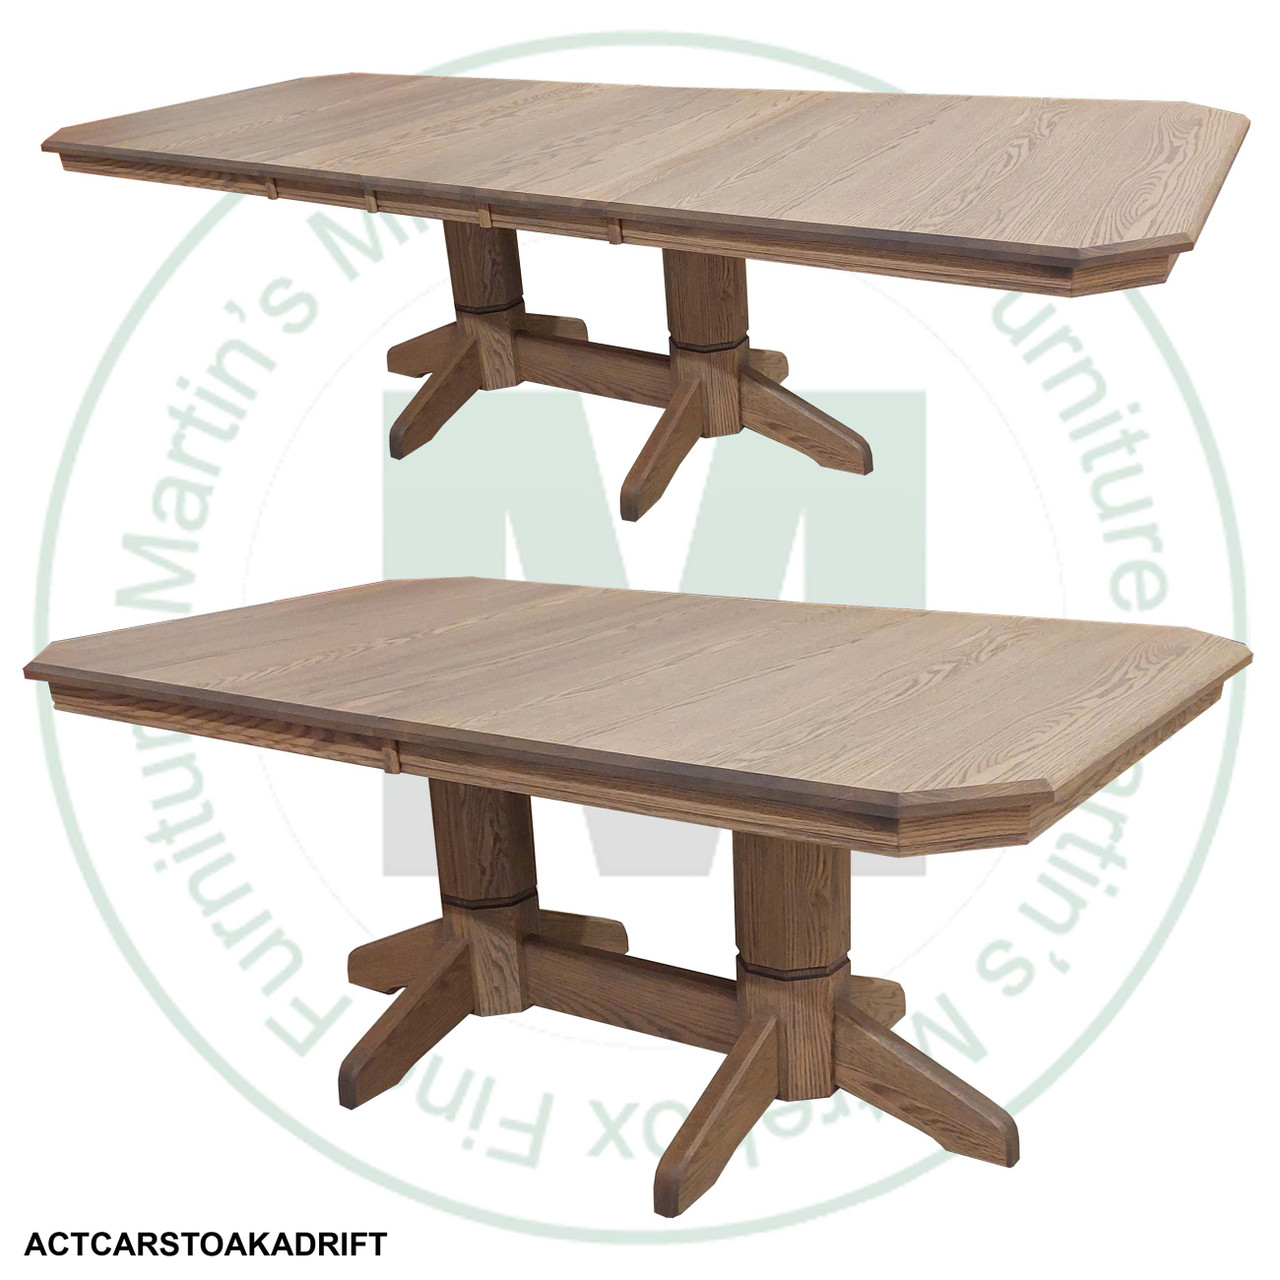 Oak Urban Classic Double Pedestal Table 48''D x 72''W x 30''H With 4 - 12'' Leaves